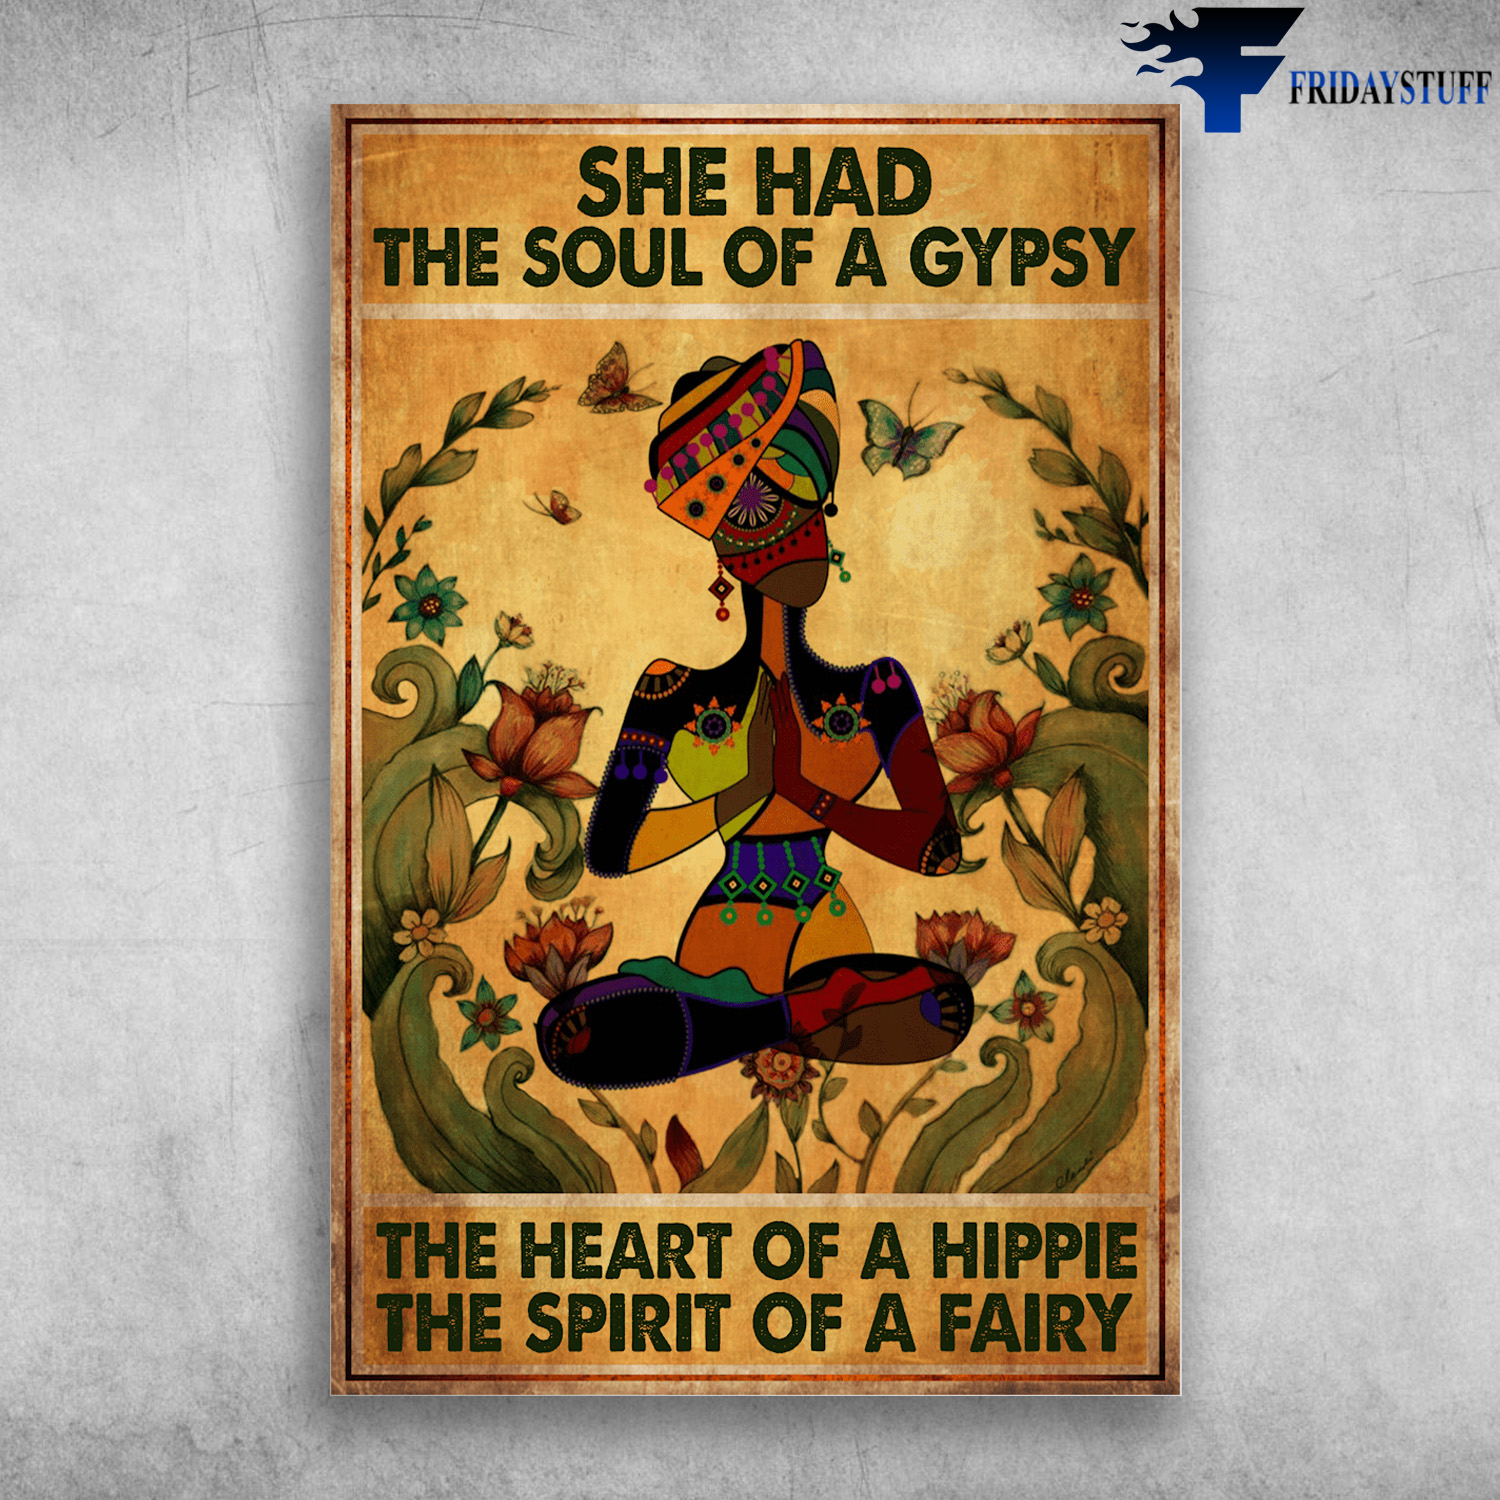 The Girl Meditated - She Had The Soul Of A Gypsy, The Heart Of Hippie